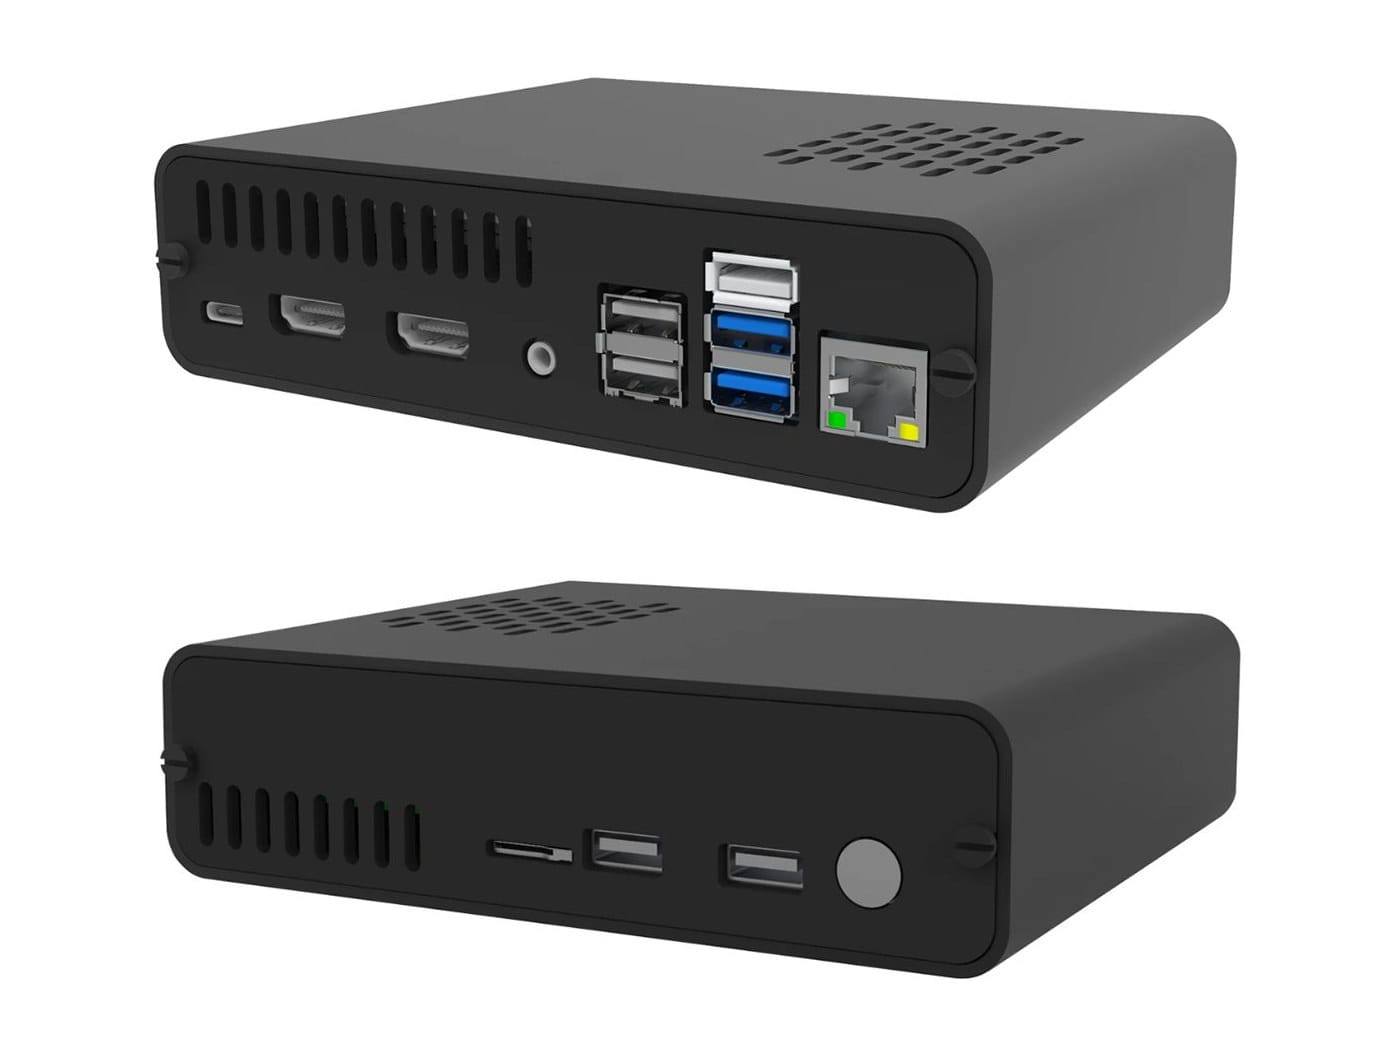 DeskPi Pro Raspberry Pi 4 Case Comes with HDD/SSD Bay, Full-sized HDMI PWM Fansink - CNX Software